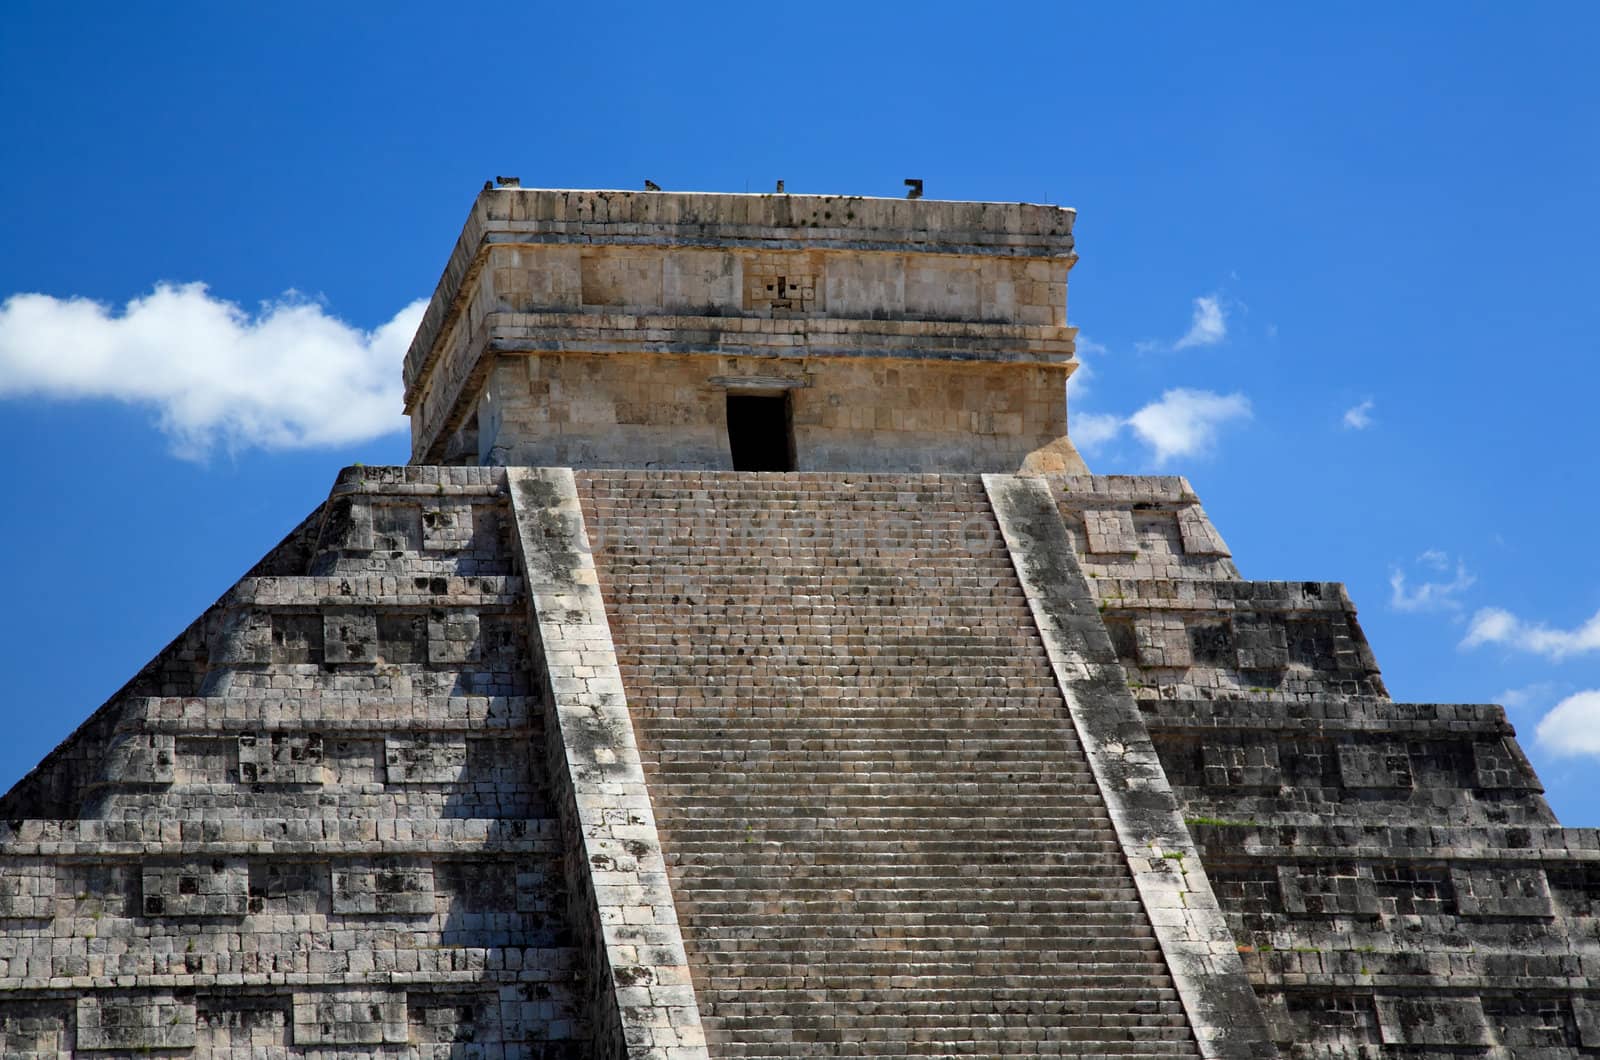 The temples of chichen itza temple in Mexico by gary718